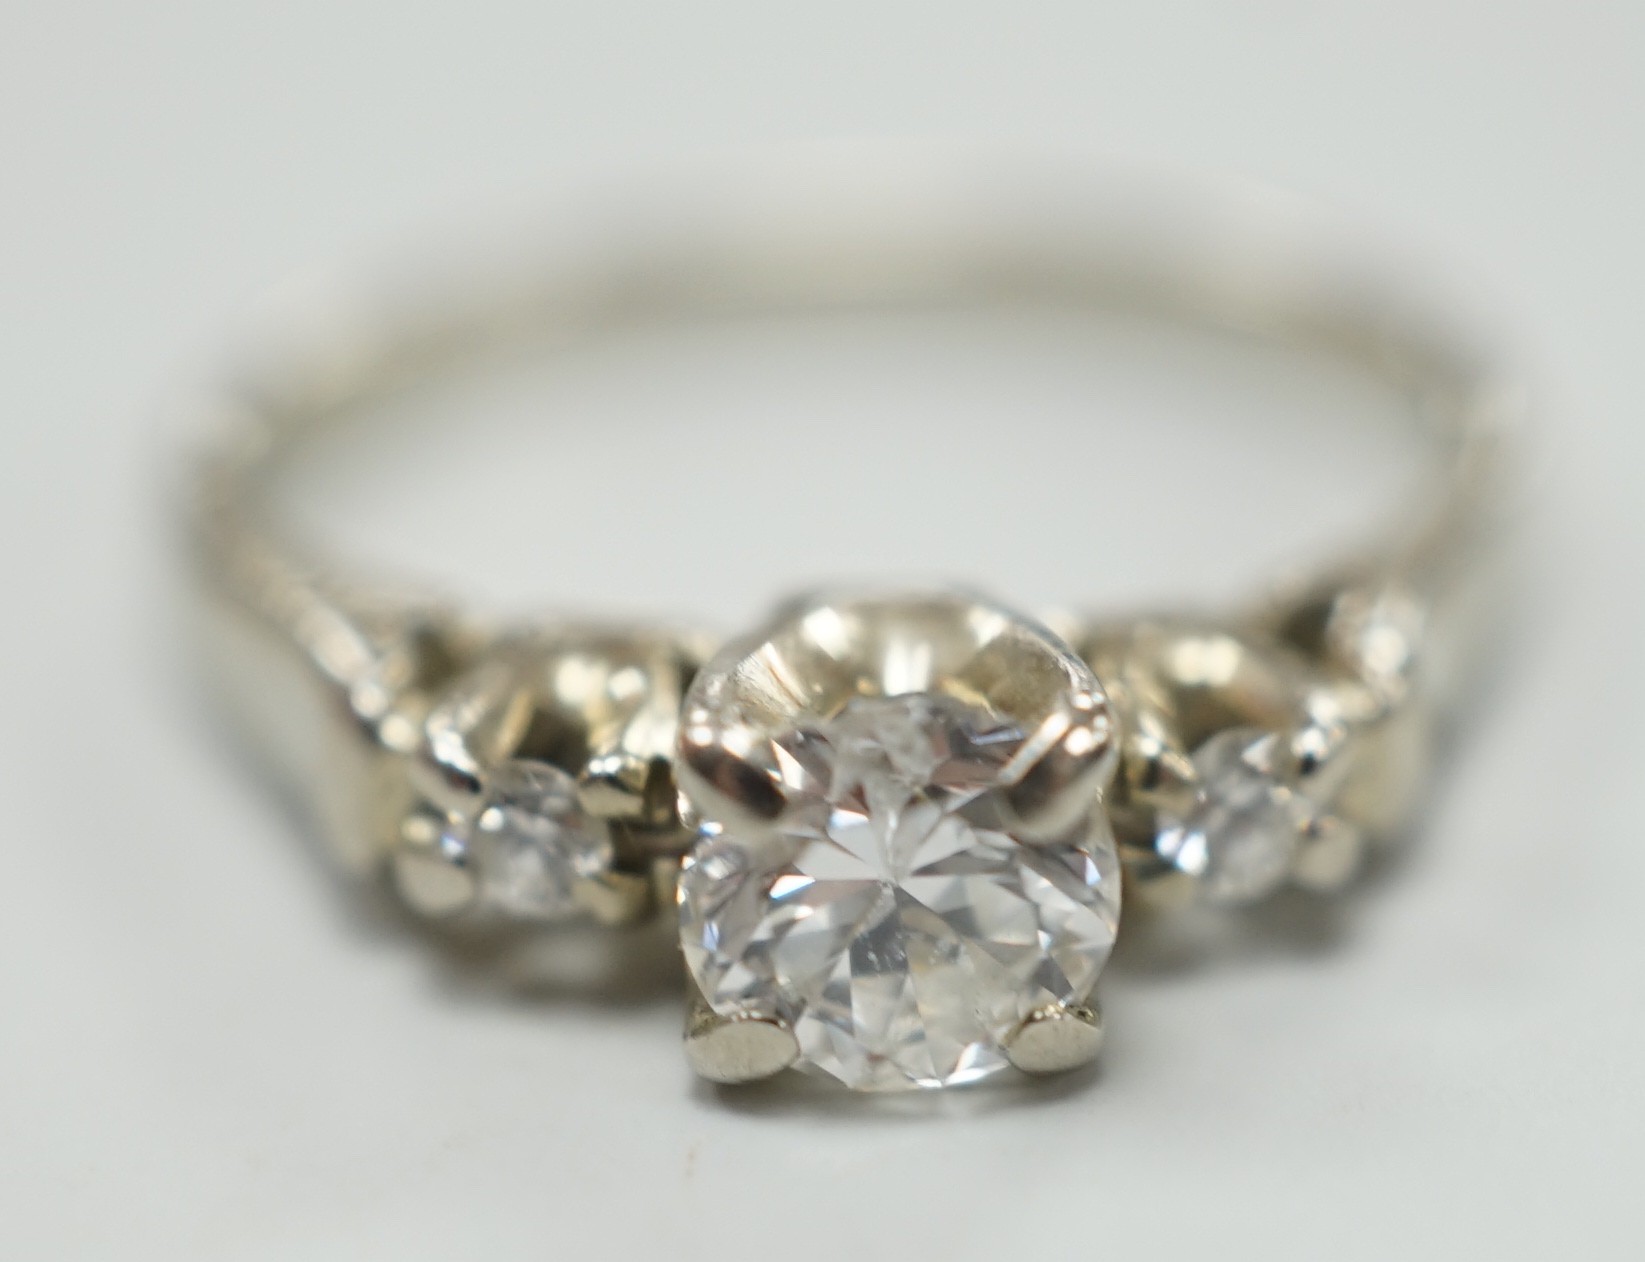 A Canadian Birks 18k white metal and single stone diamond ring, with diamond set shoulders, size H, gross weight 2.7 grams